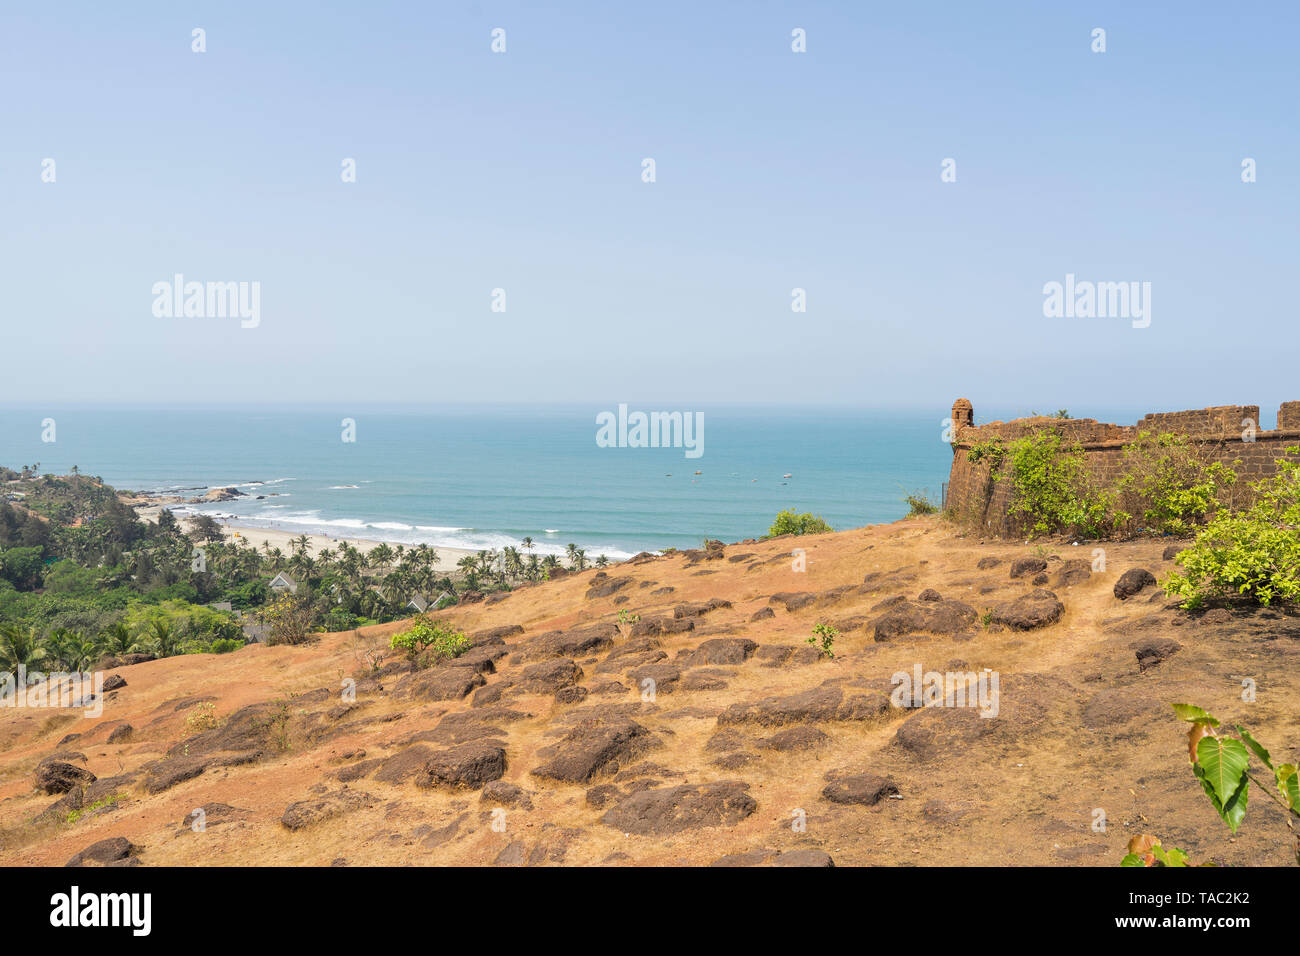 Anjuna, Goa / India - 04 03 2019, Chapora Fort in the northern Goa, India. Old ruins on top of hill. Stock Photo